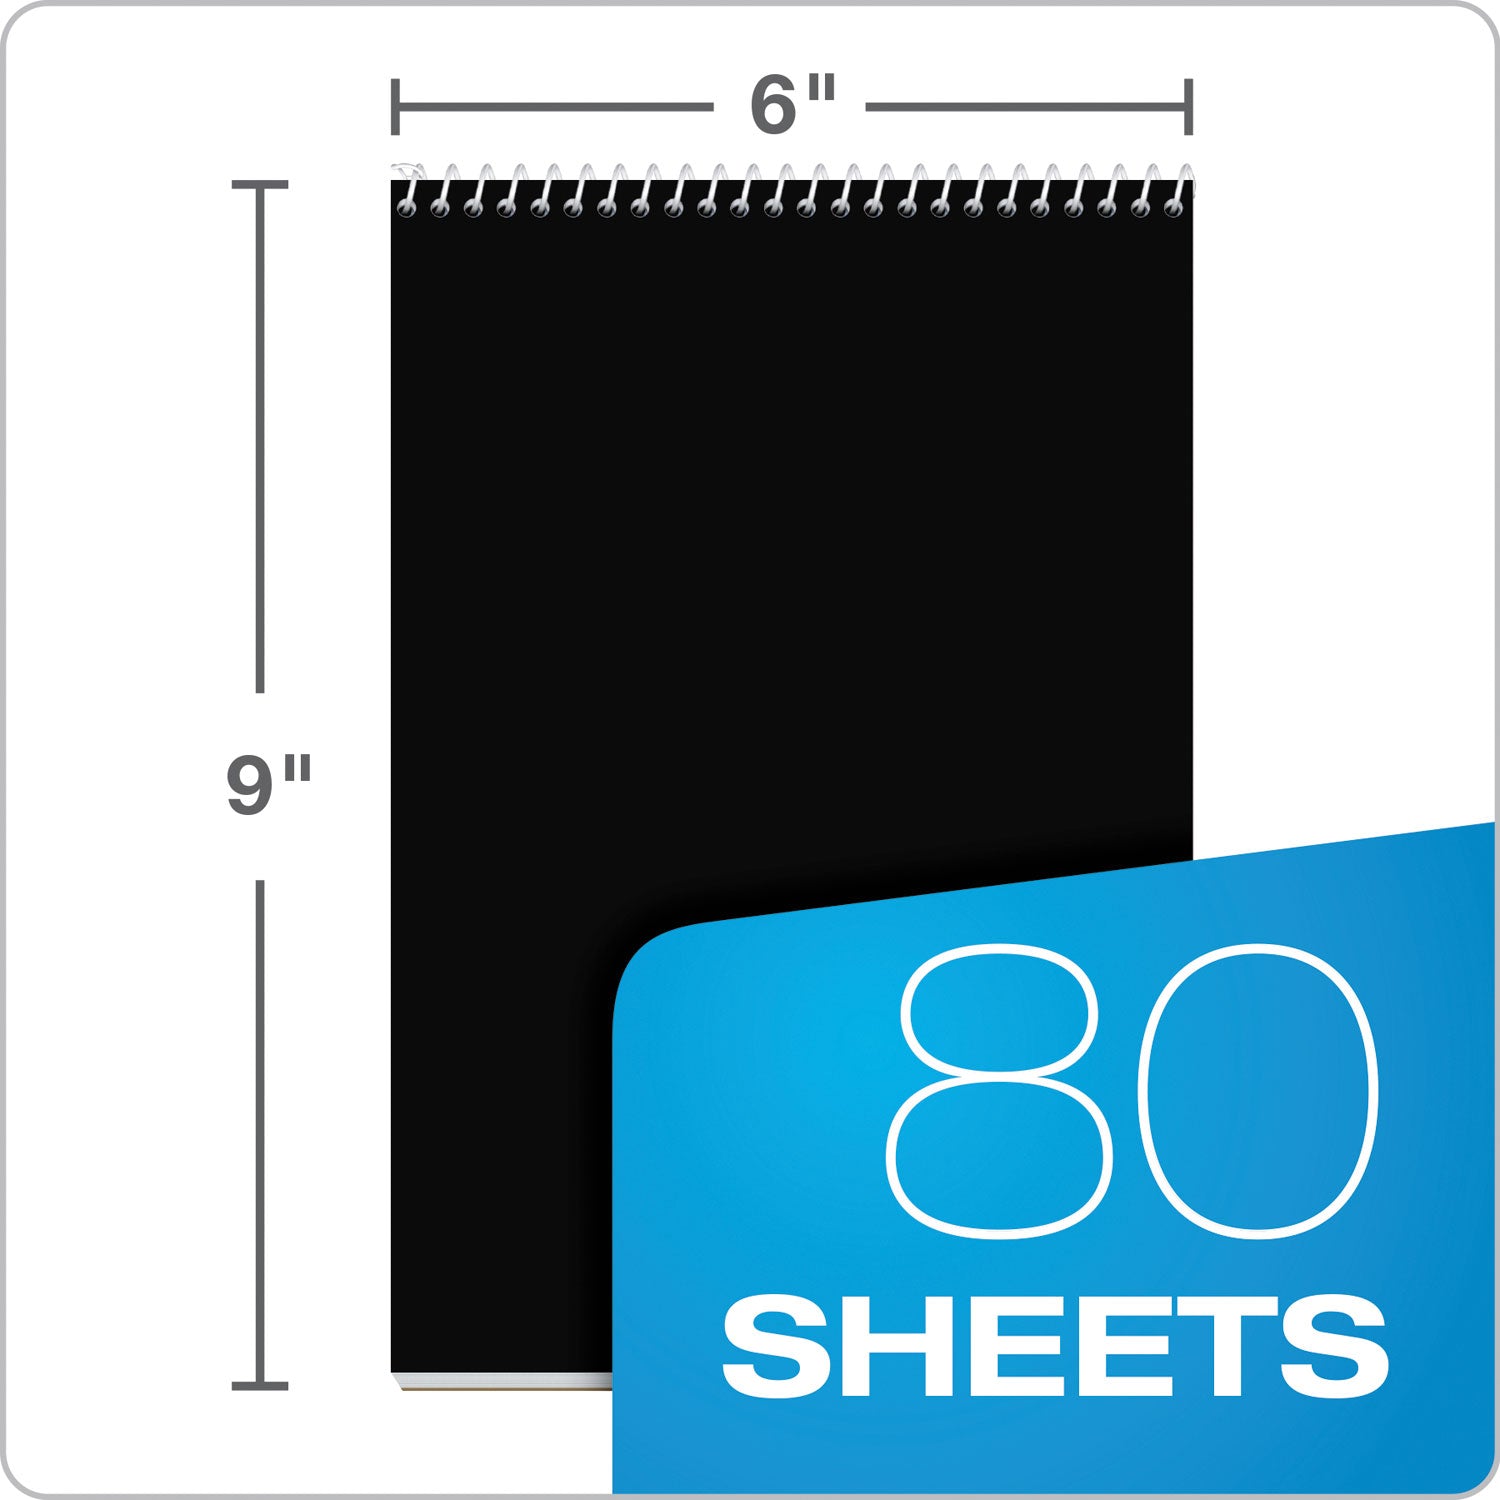 FocusNotes Steno Pad, Pitman Rule, Blue Cover, 80 White 6 x 9 Sheets - 